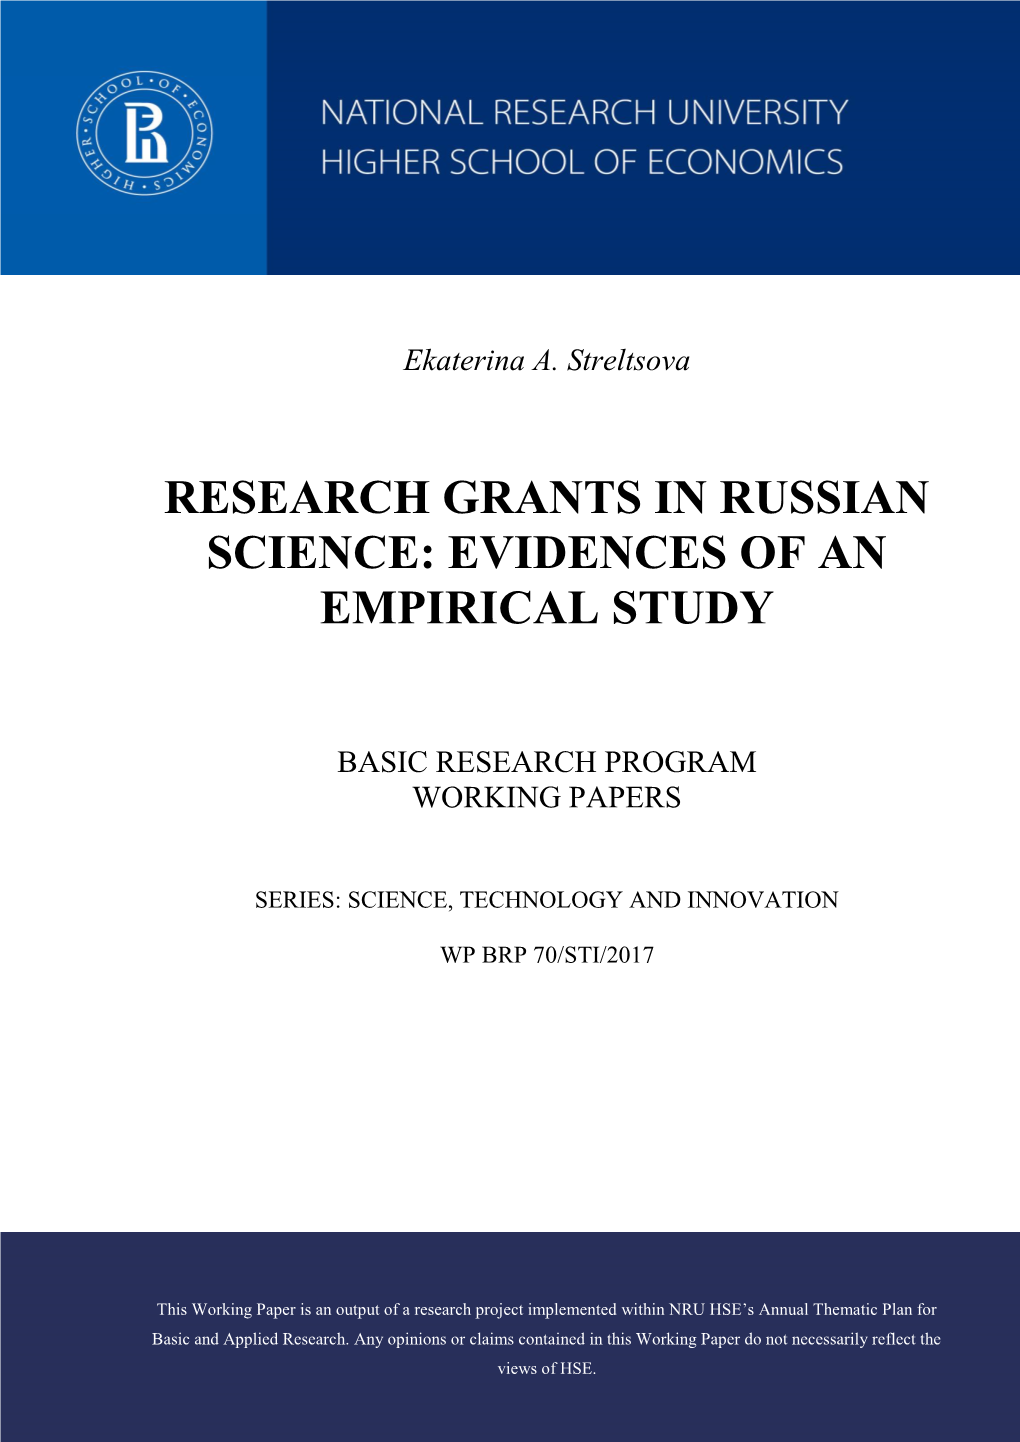 "Research Grants in Russian Science: Evidences of an Empirical